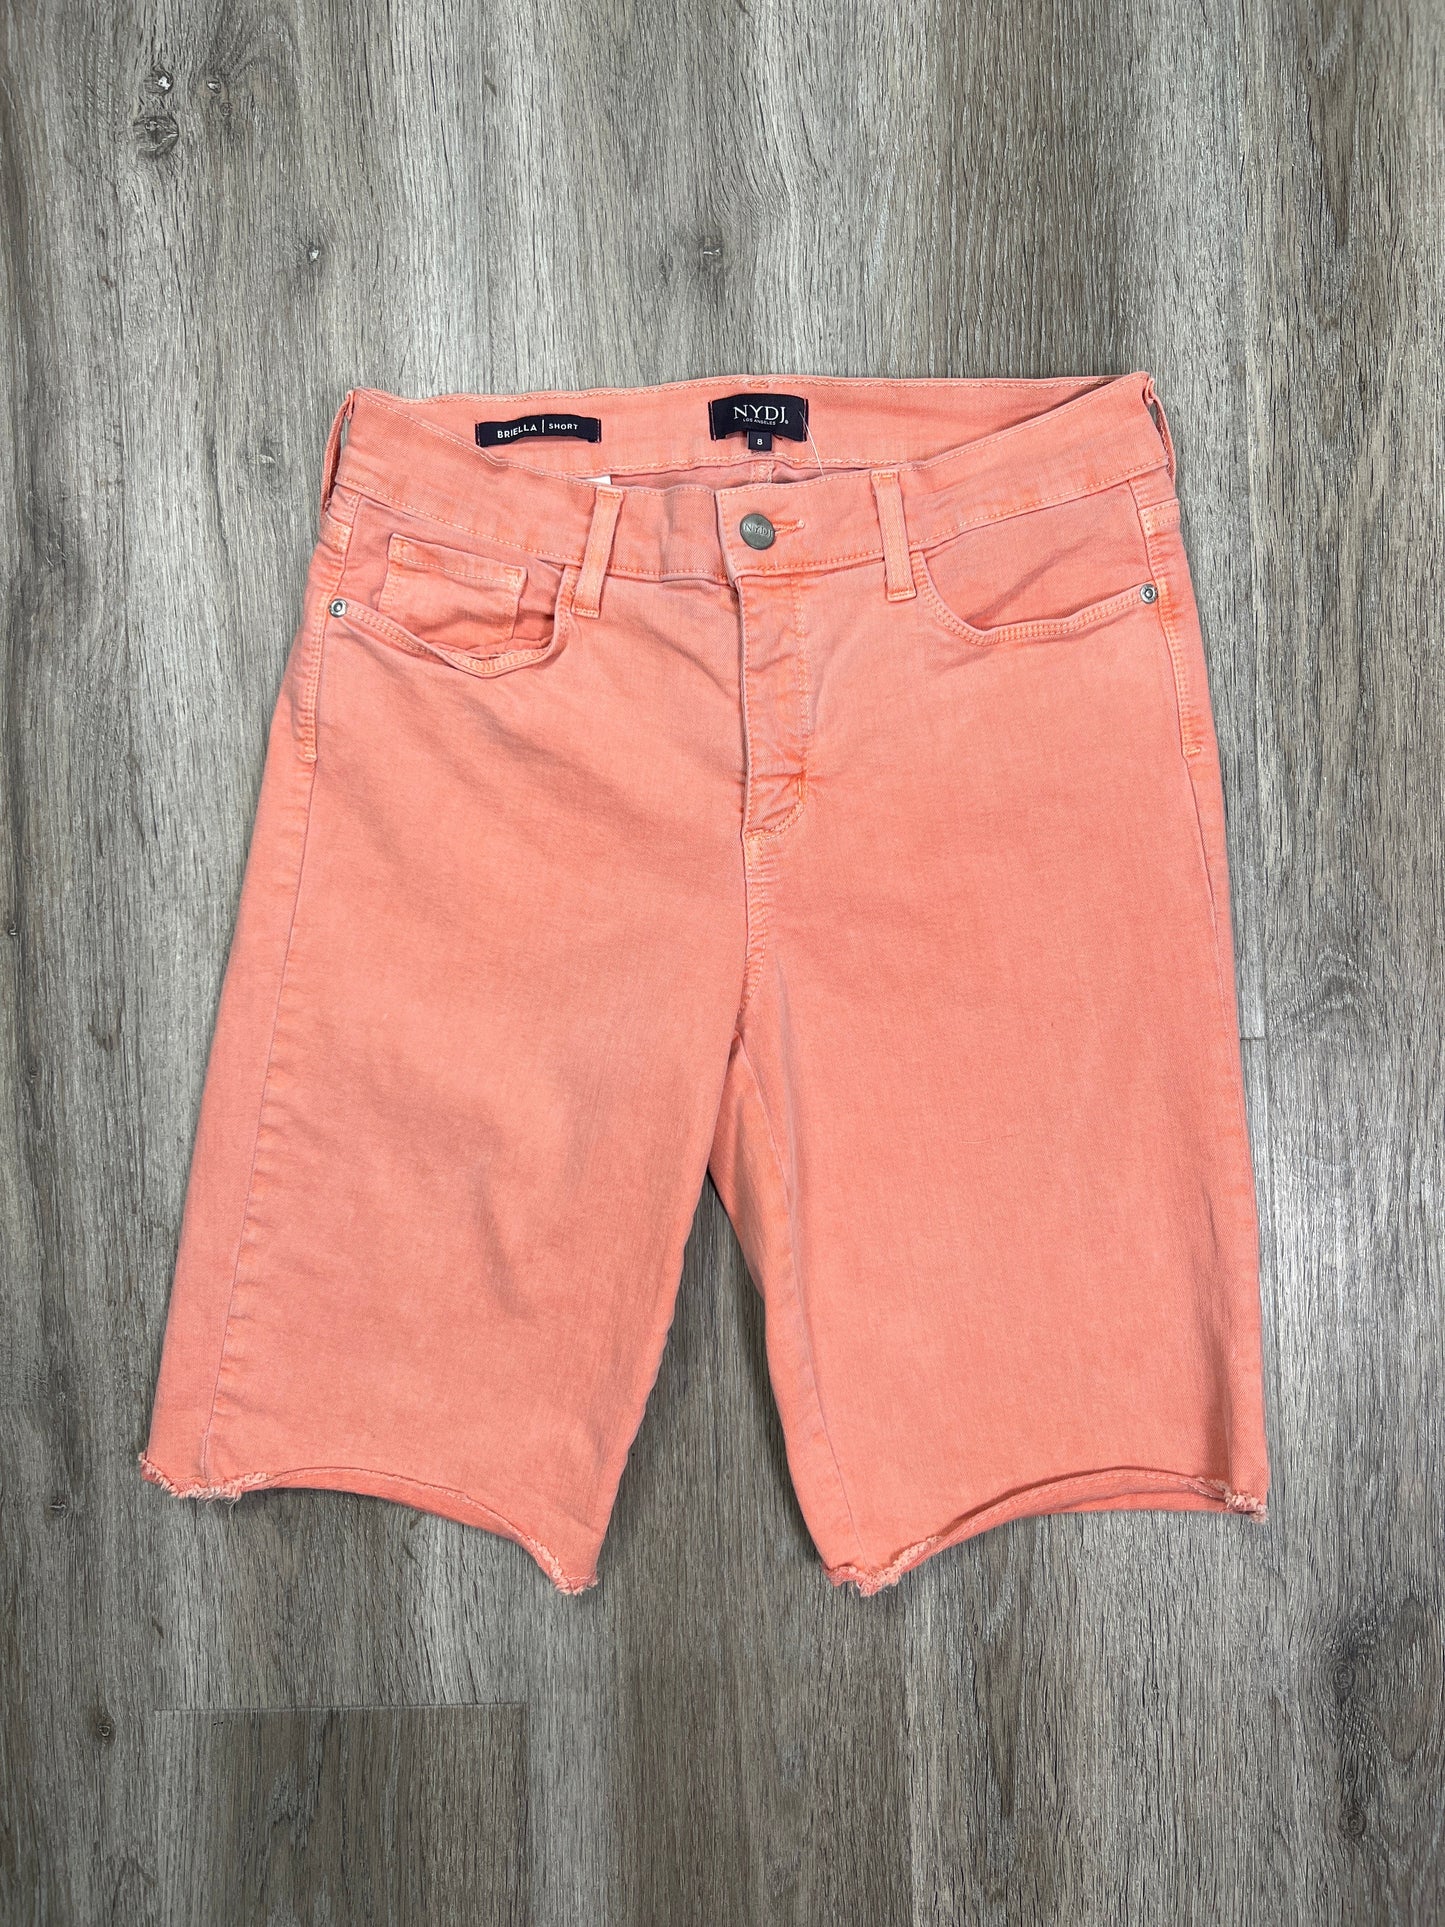 Orange Shorts Not Your Daughters Jeans, Size M